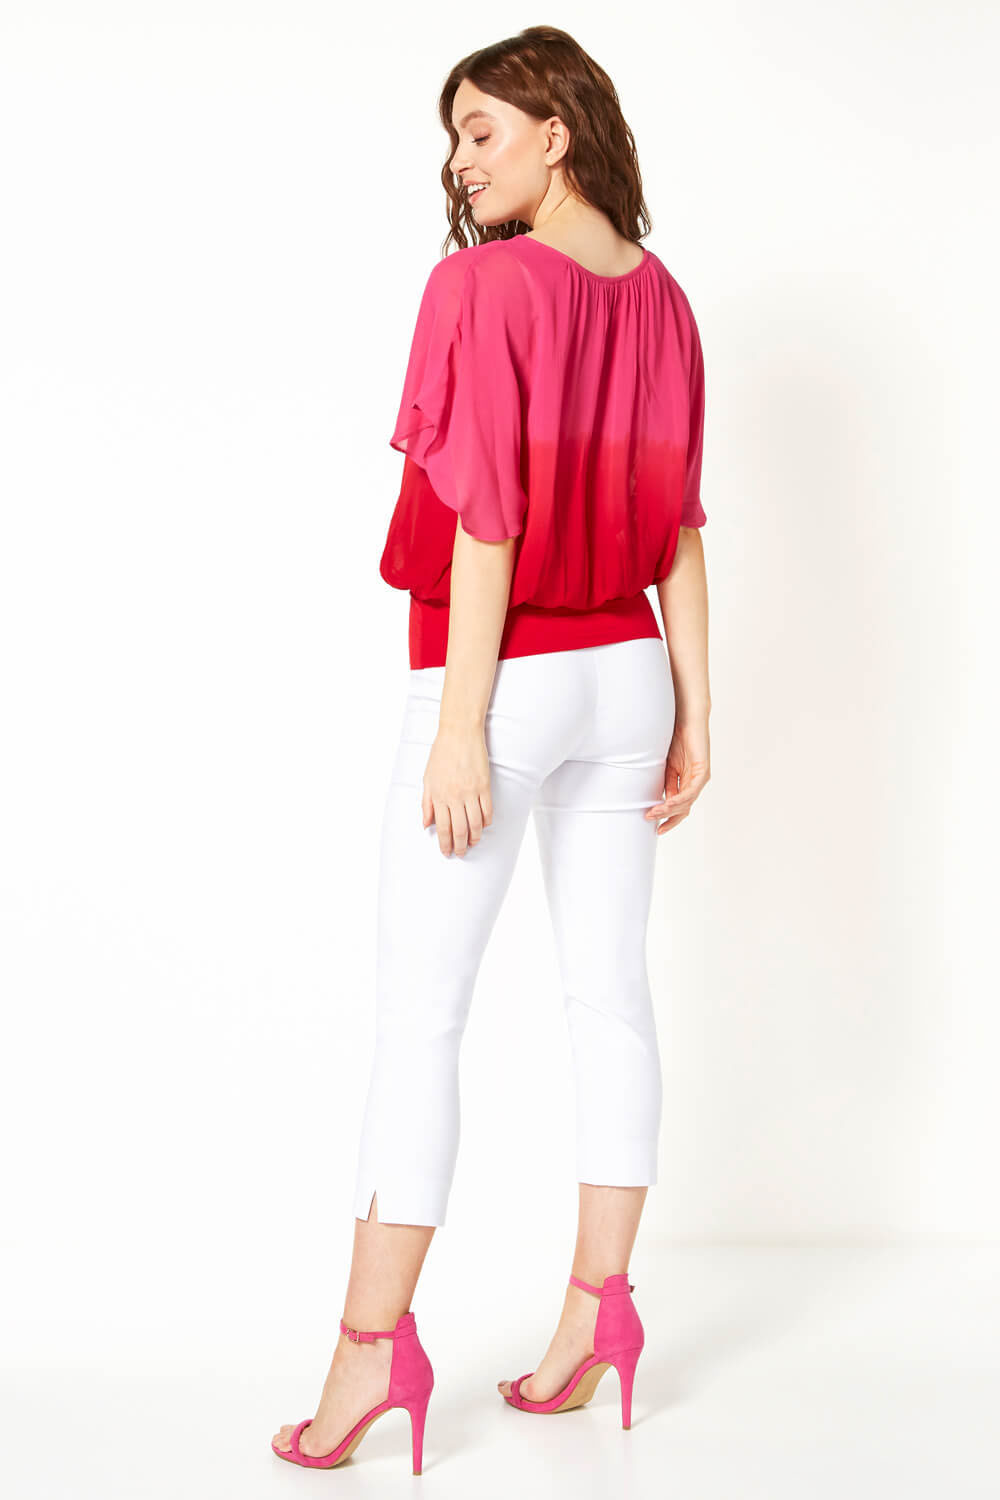 Fuchsia Ombre Batwing Overlay Top, Image 2 of 5